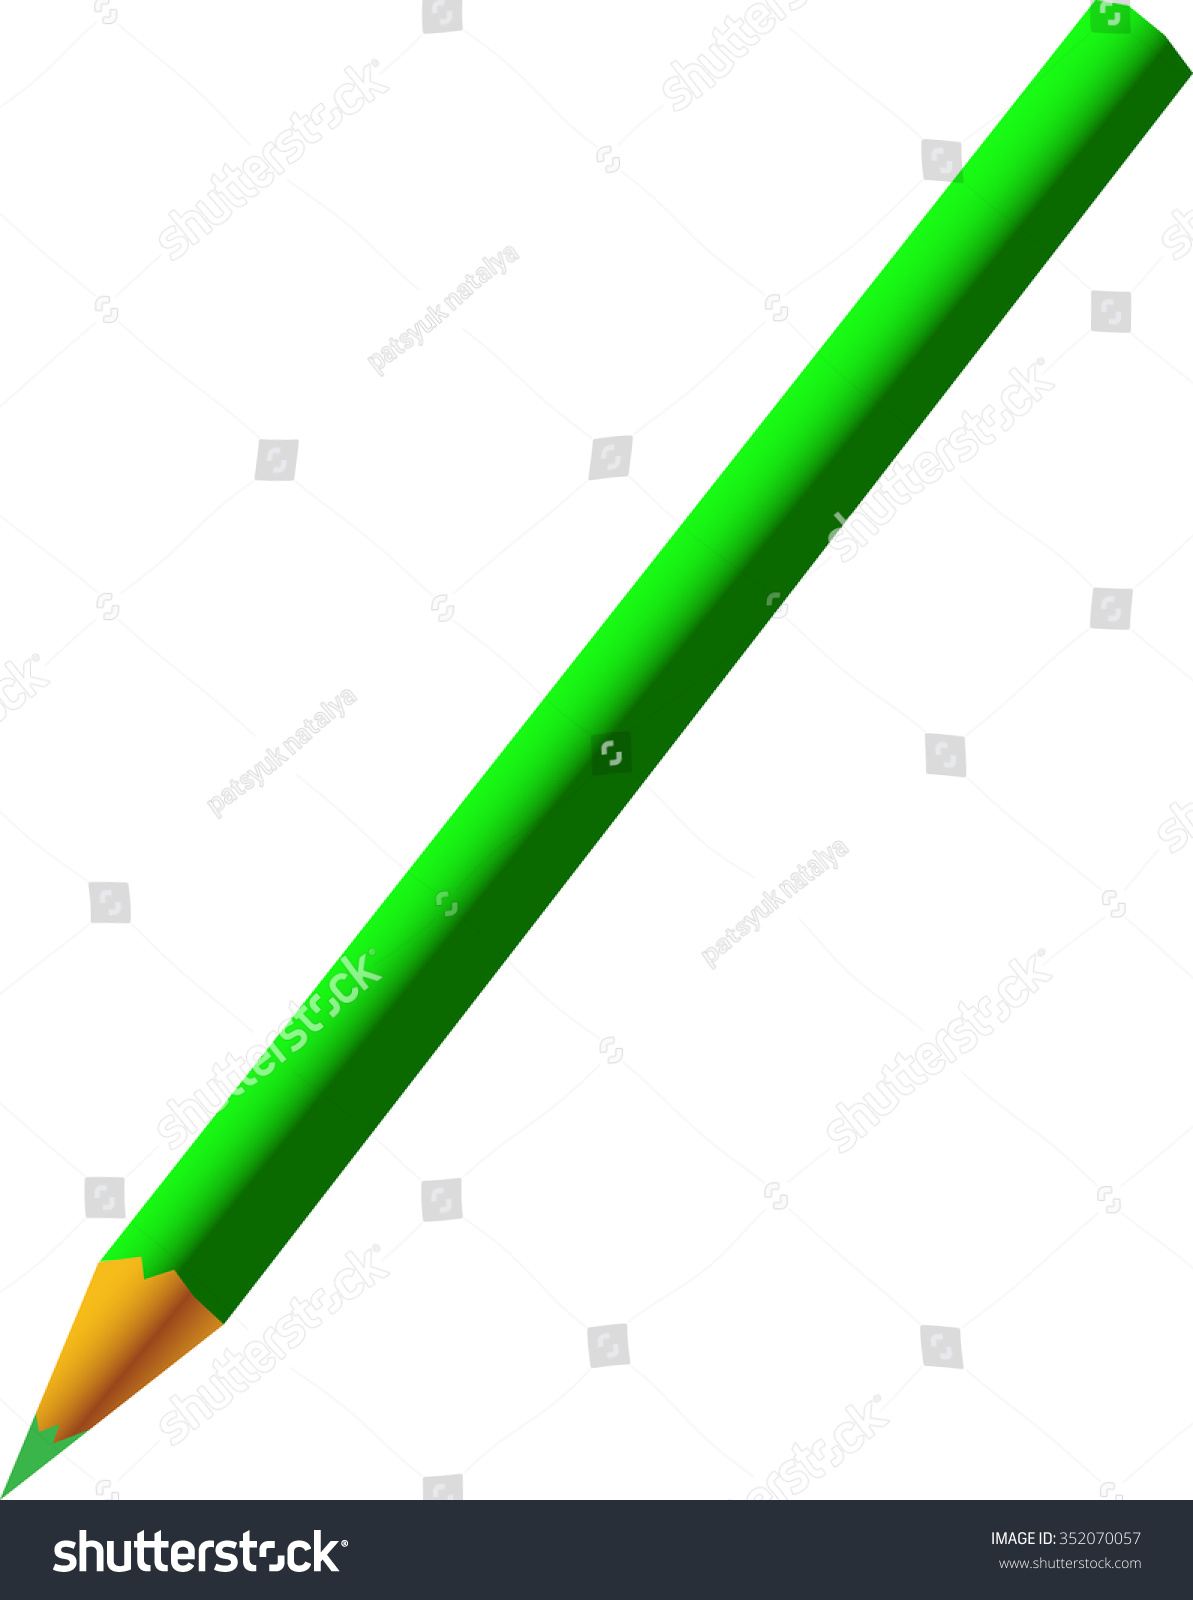 green pencil on transparent background isolated #352070057